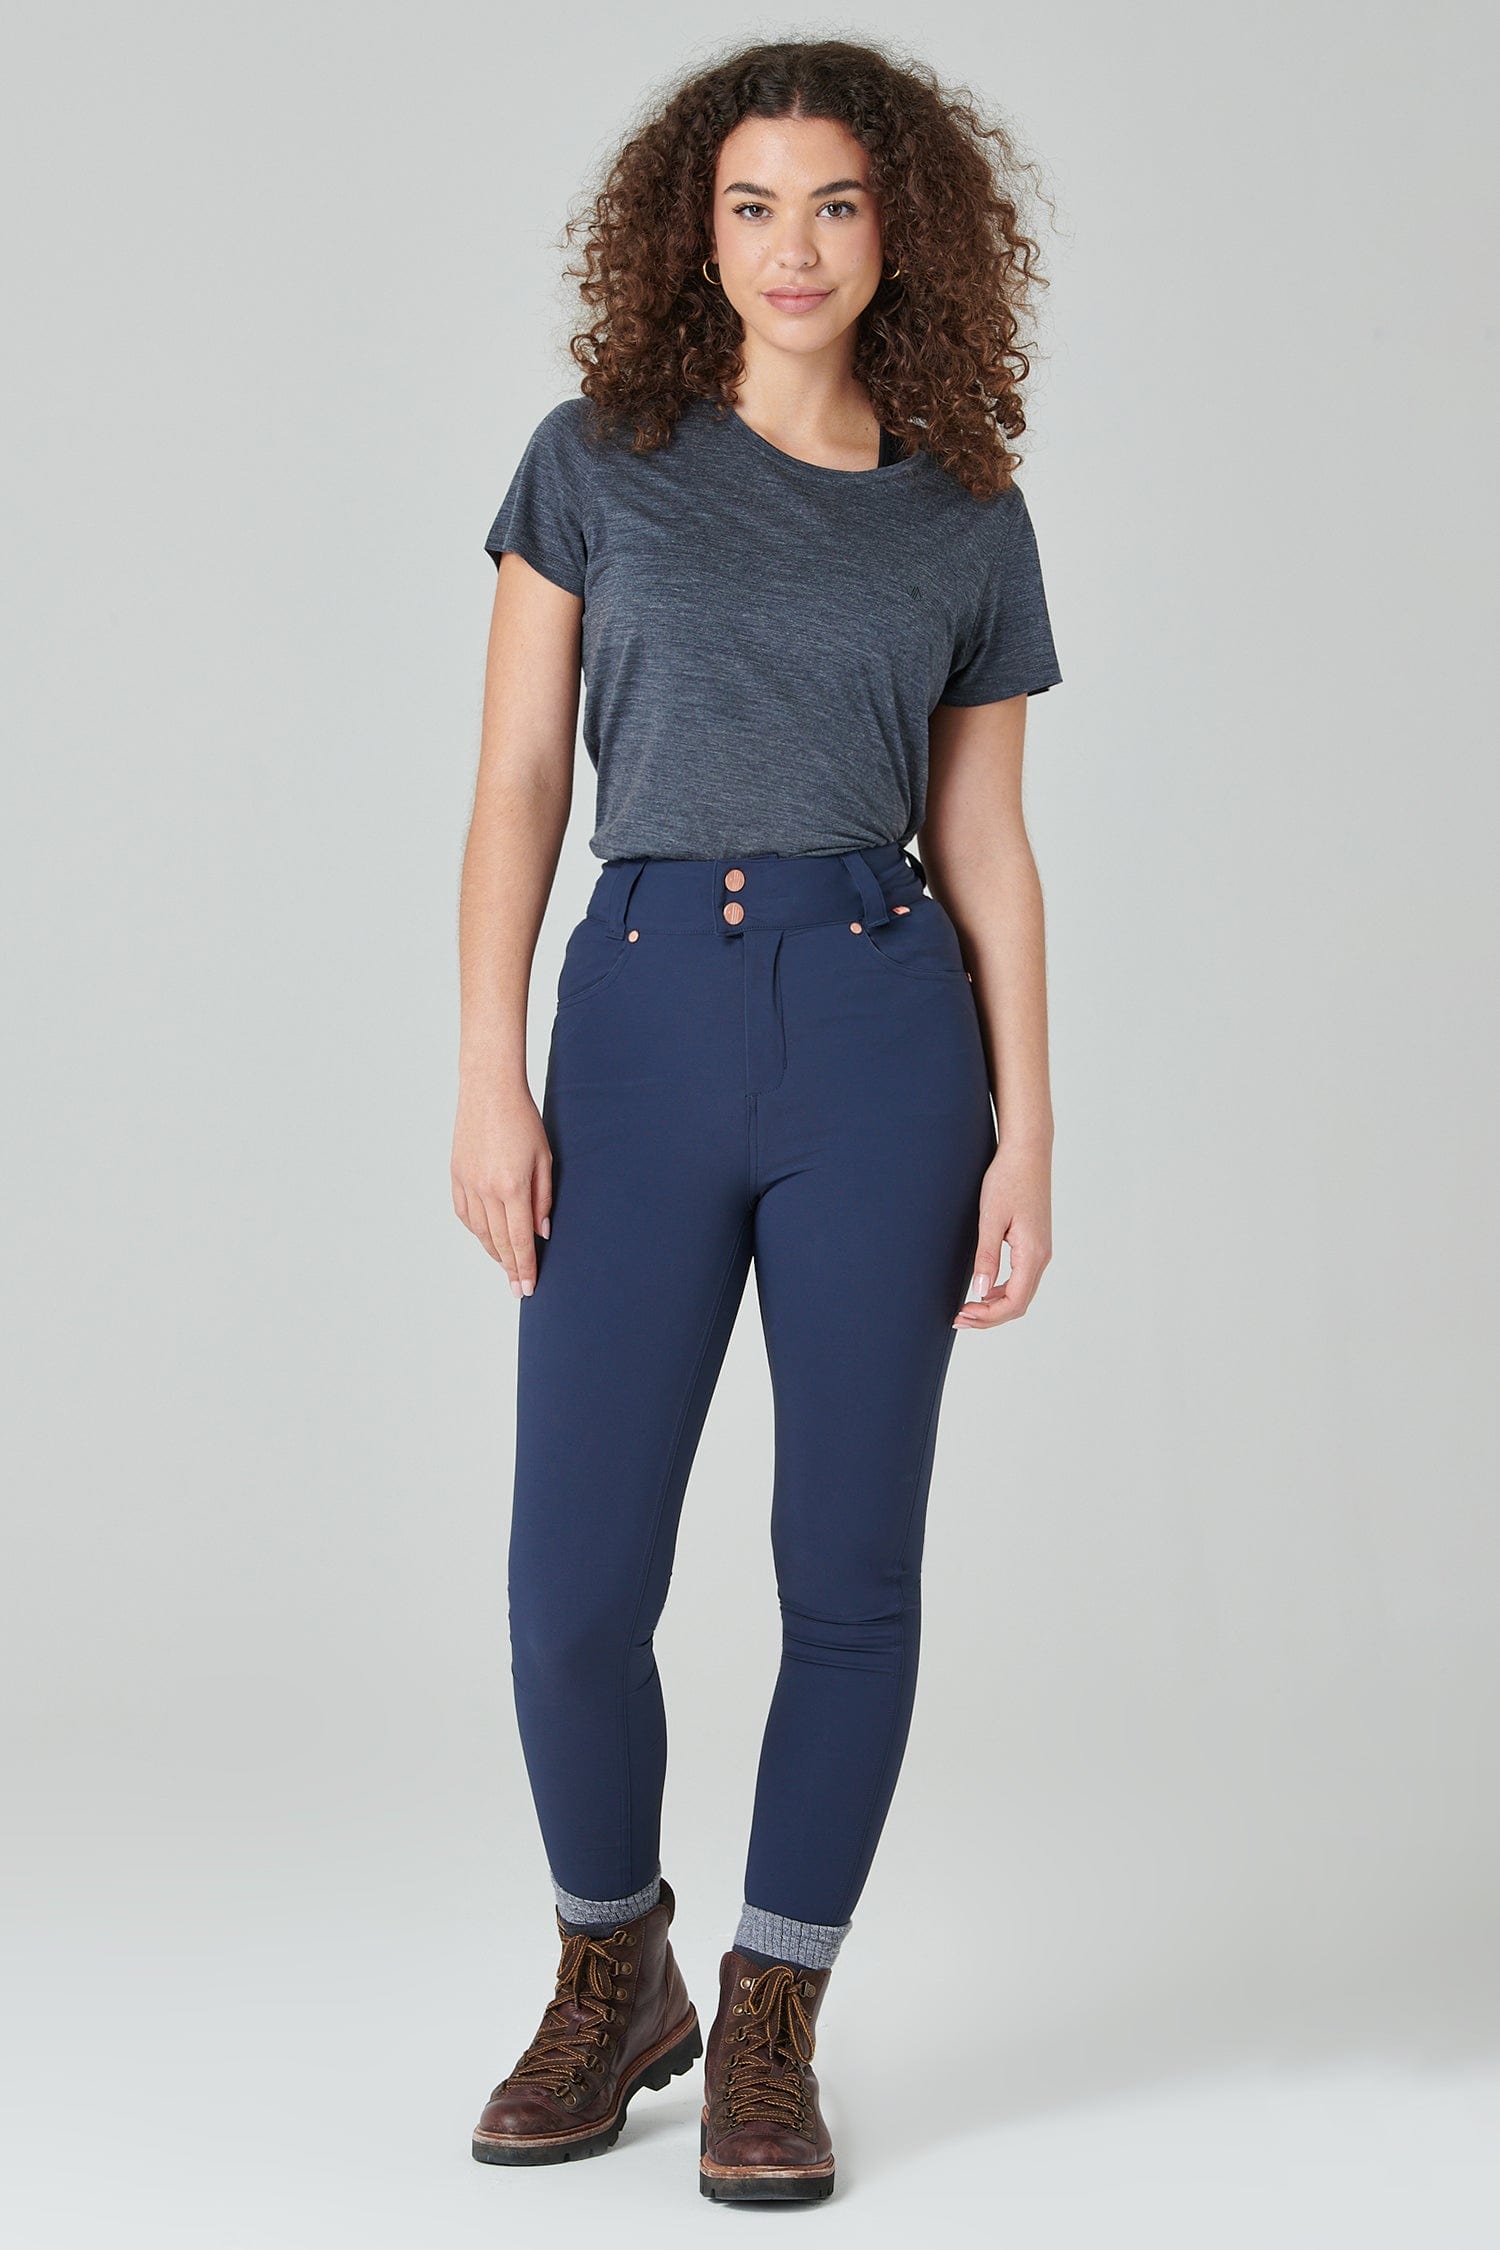 The Shape Skinny Outdoor Trousers - Deep Navy Trousers  